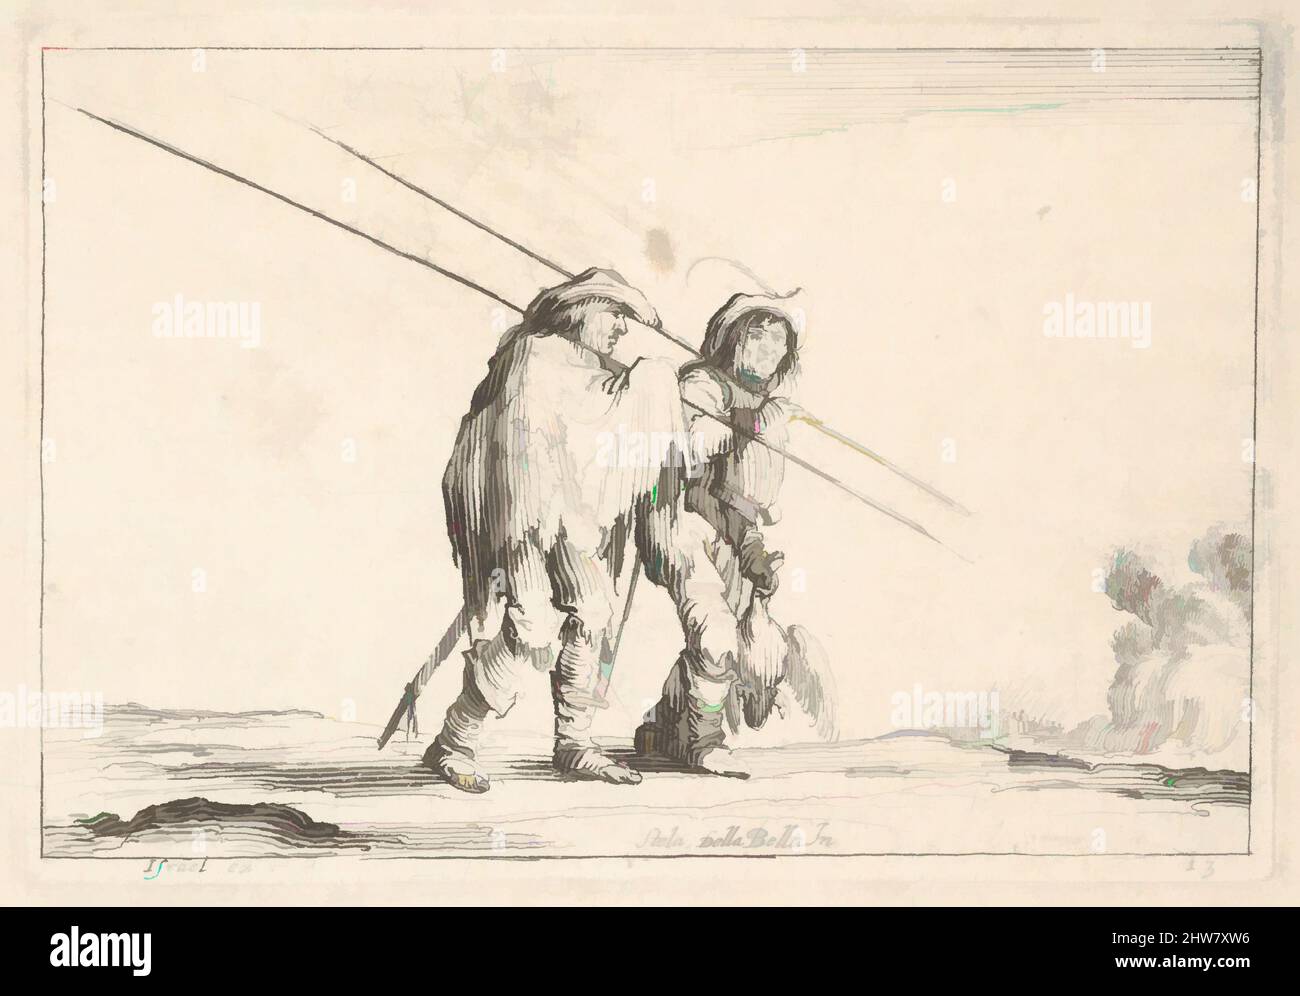 Art inspired by Plate 13: Two pikemen walking towards the right, each with their pikes in their right hands, from 'Various Figures' (Agréable diversité de figures), 1642, Etching; undescribed state between second and third of five, Sheet: 3 1/8 x 4 3/8 in. (7.9 x 11.1 cm), Prints, Classic works modernized by Artotop with a splash of modernity. Shapes, color and value, eye-catching visual impact on art. Emotions through freedom of artworks in a contemporary way. A timeless message pursuing a wildly creative new direction. Artists turning to the digital medium and creating the Artotop NFT Stock Photo